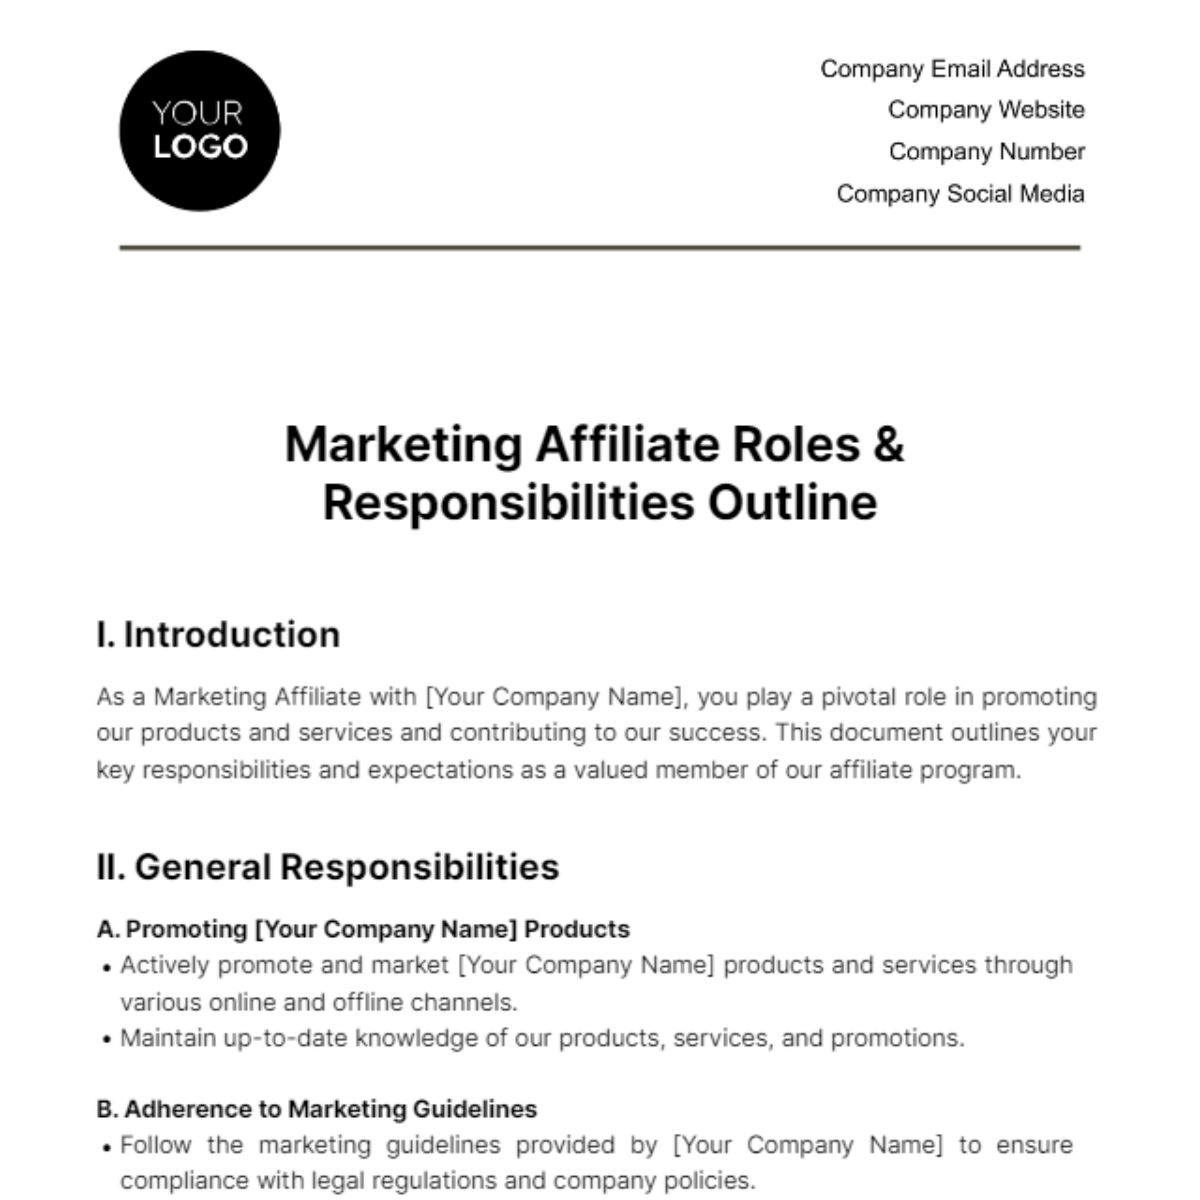 Free Marketing Affiliate Roles & Responsibilities Outline Template